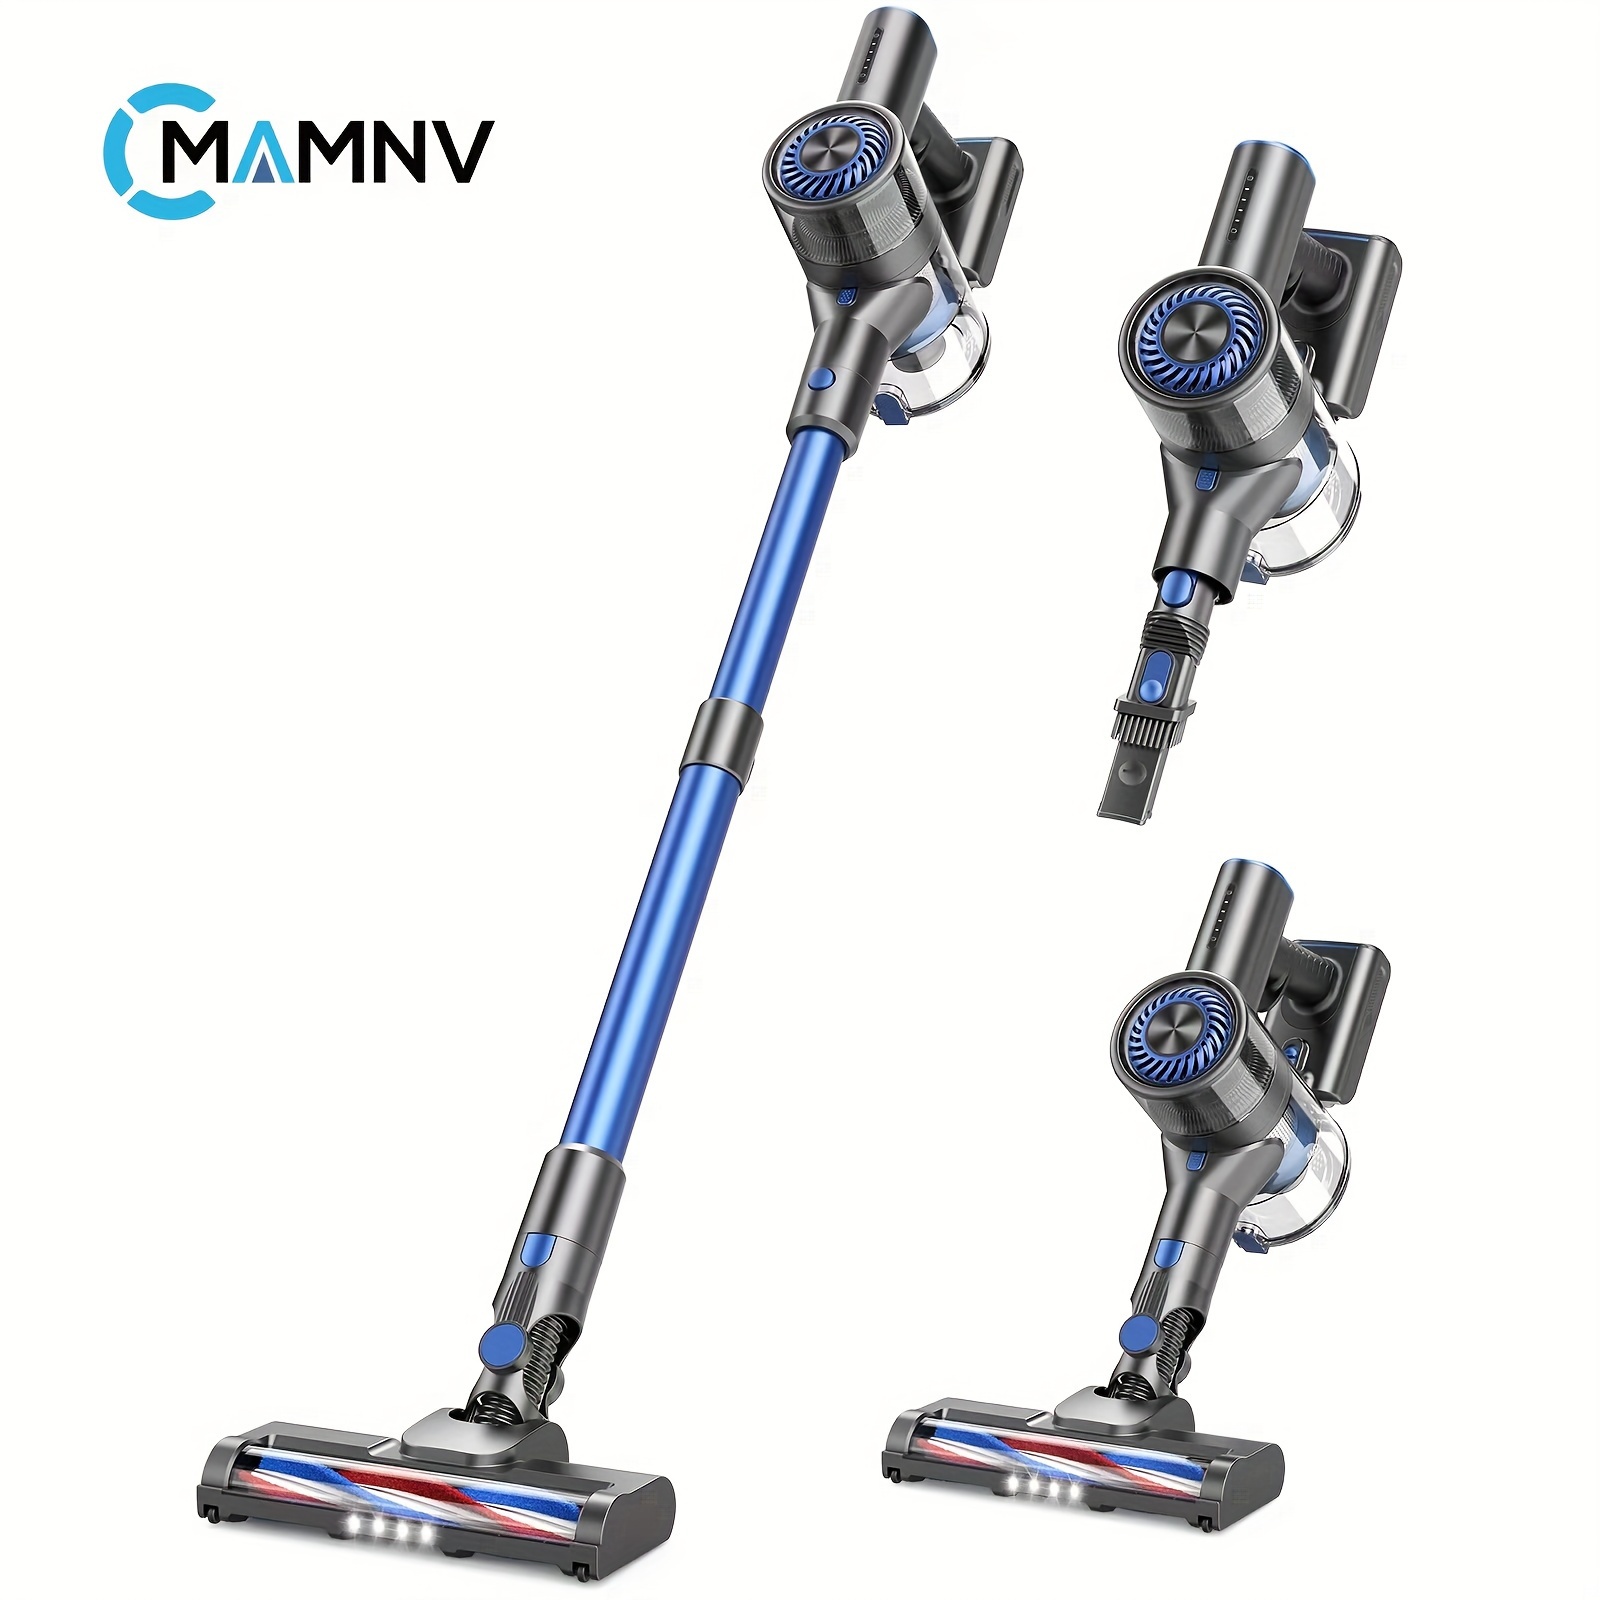 

Cordless Vacuum Cleaner With 80000 Rpm High-speed Brushless Motor, 2600mah Powerful Lithium Batteries, 5 Stages High Efficiency Filtration, Up To 40 Mins Runtime